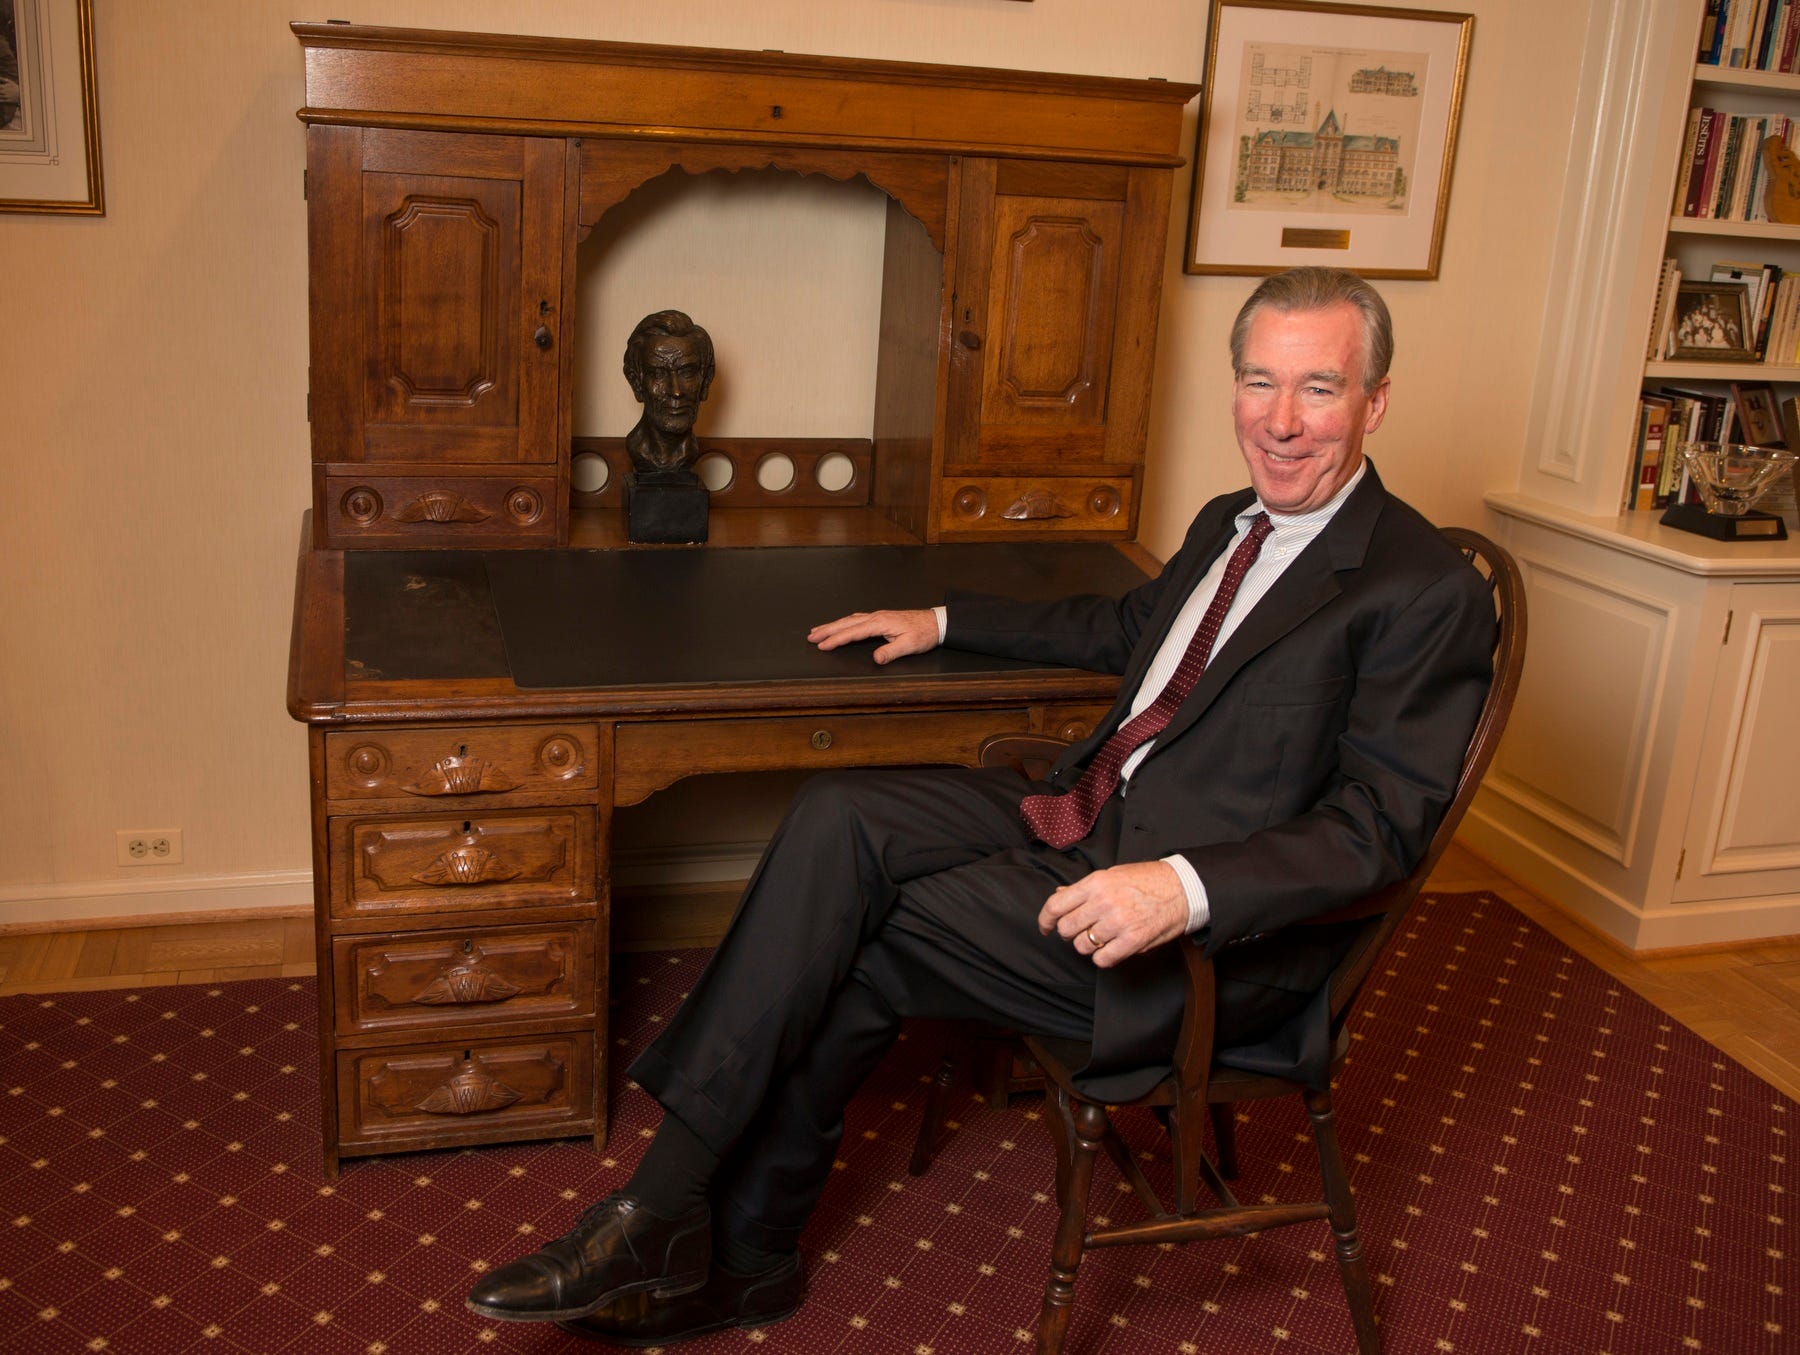 Dave Bakke: Was this desk used by Lincoln?